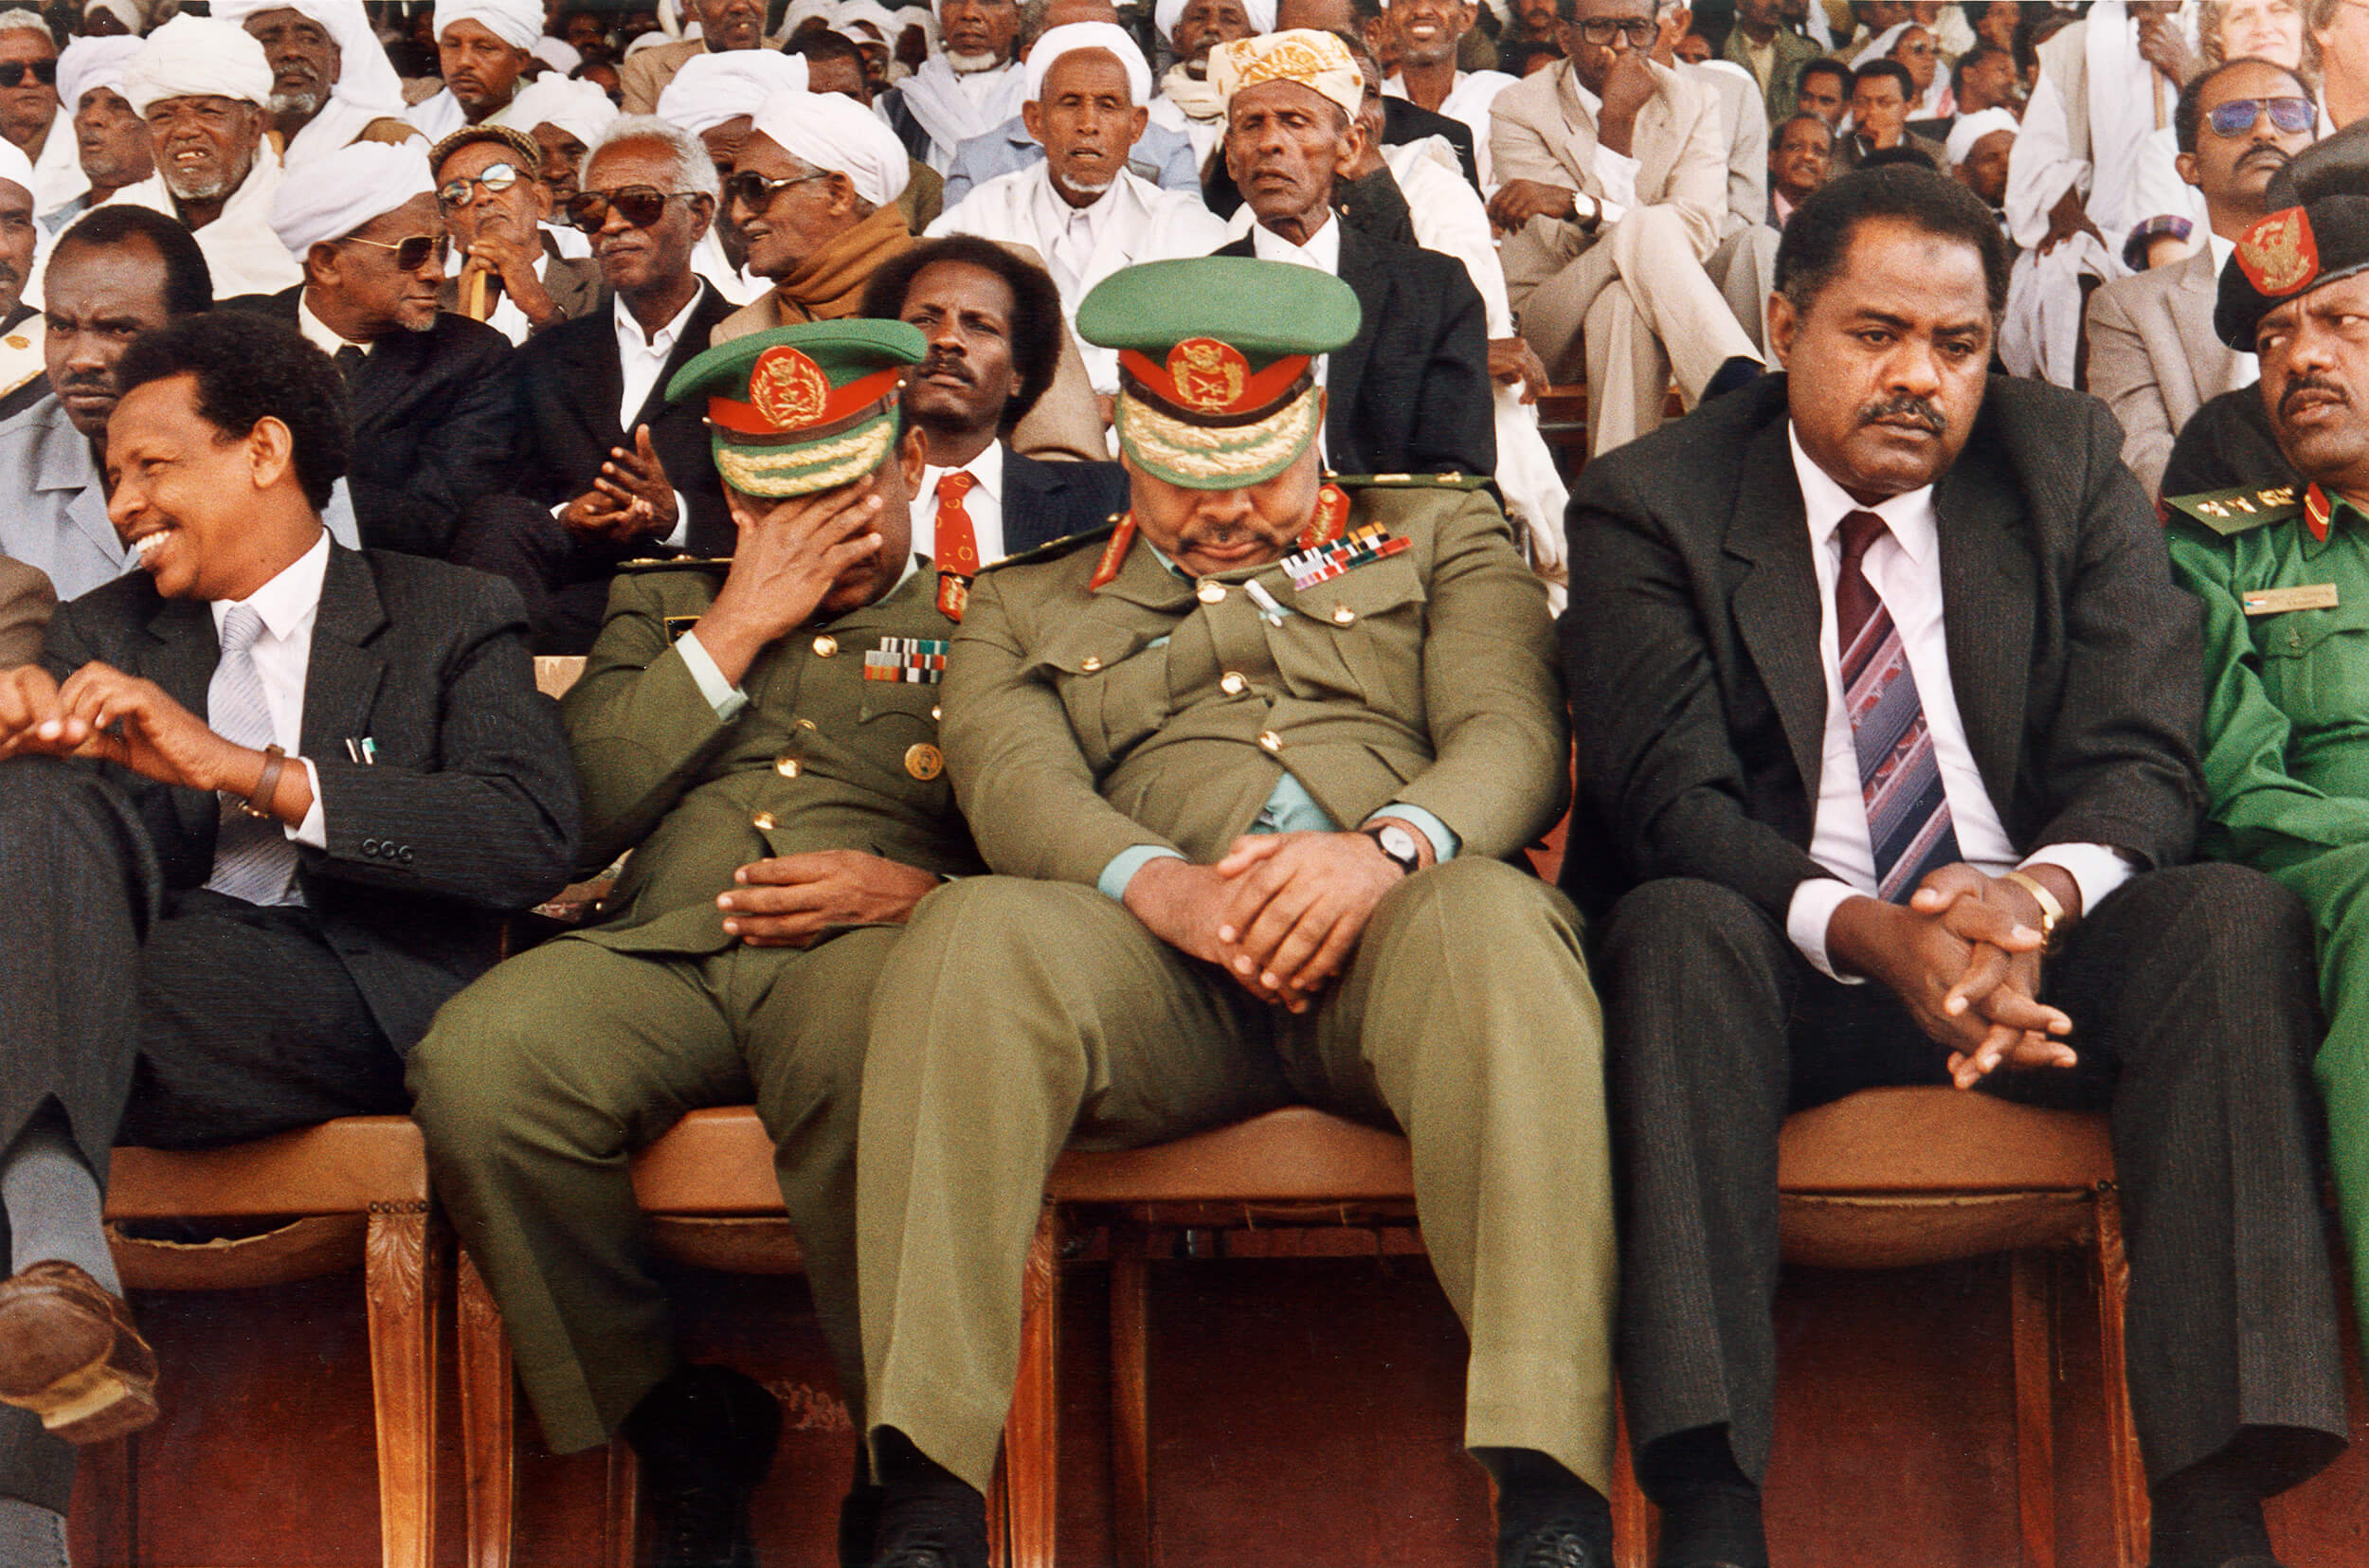  Peace is celebrated. Generals from Sudan in capital Asmara, participate in Eritrea's celebration of the liberation after thirty years of war. 